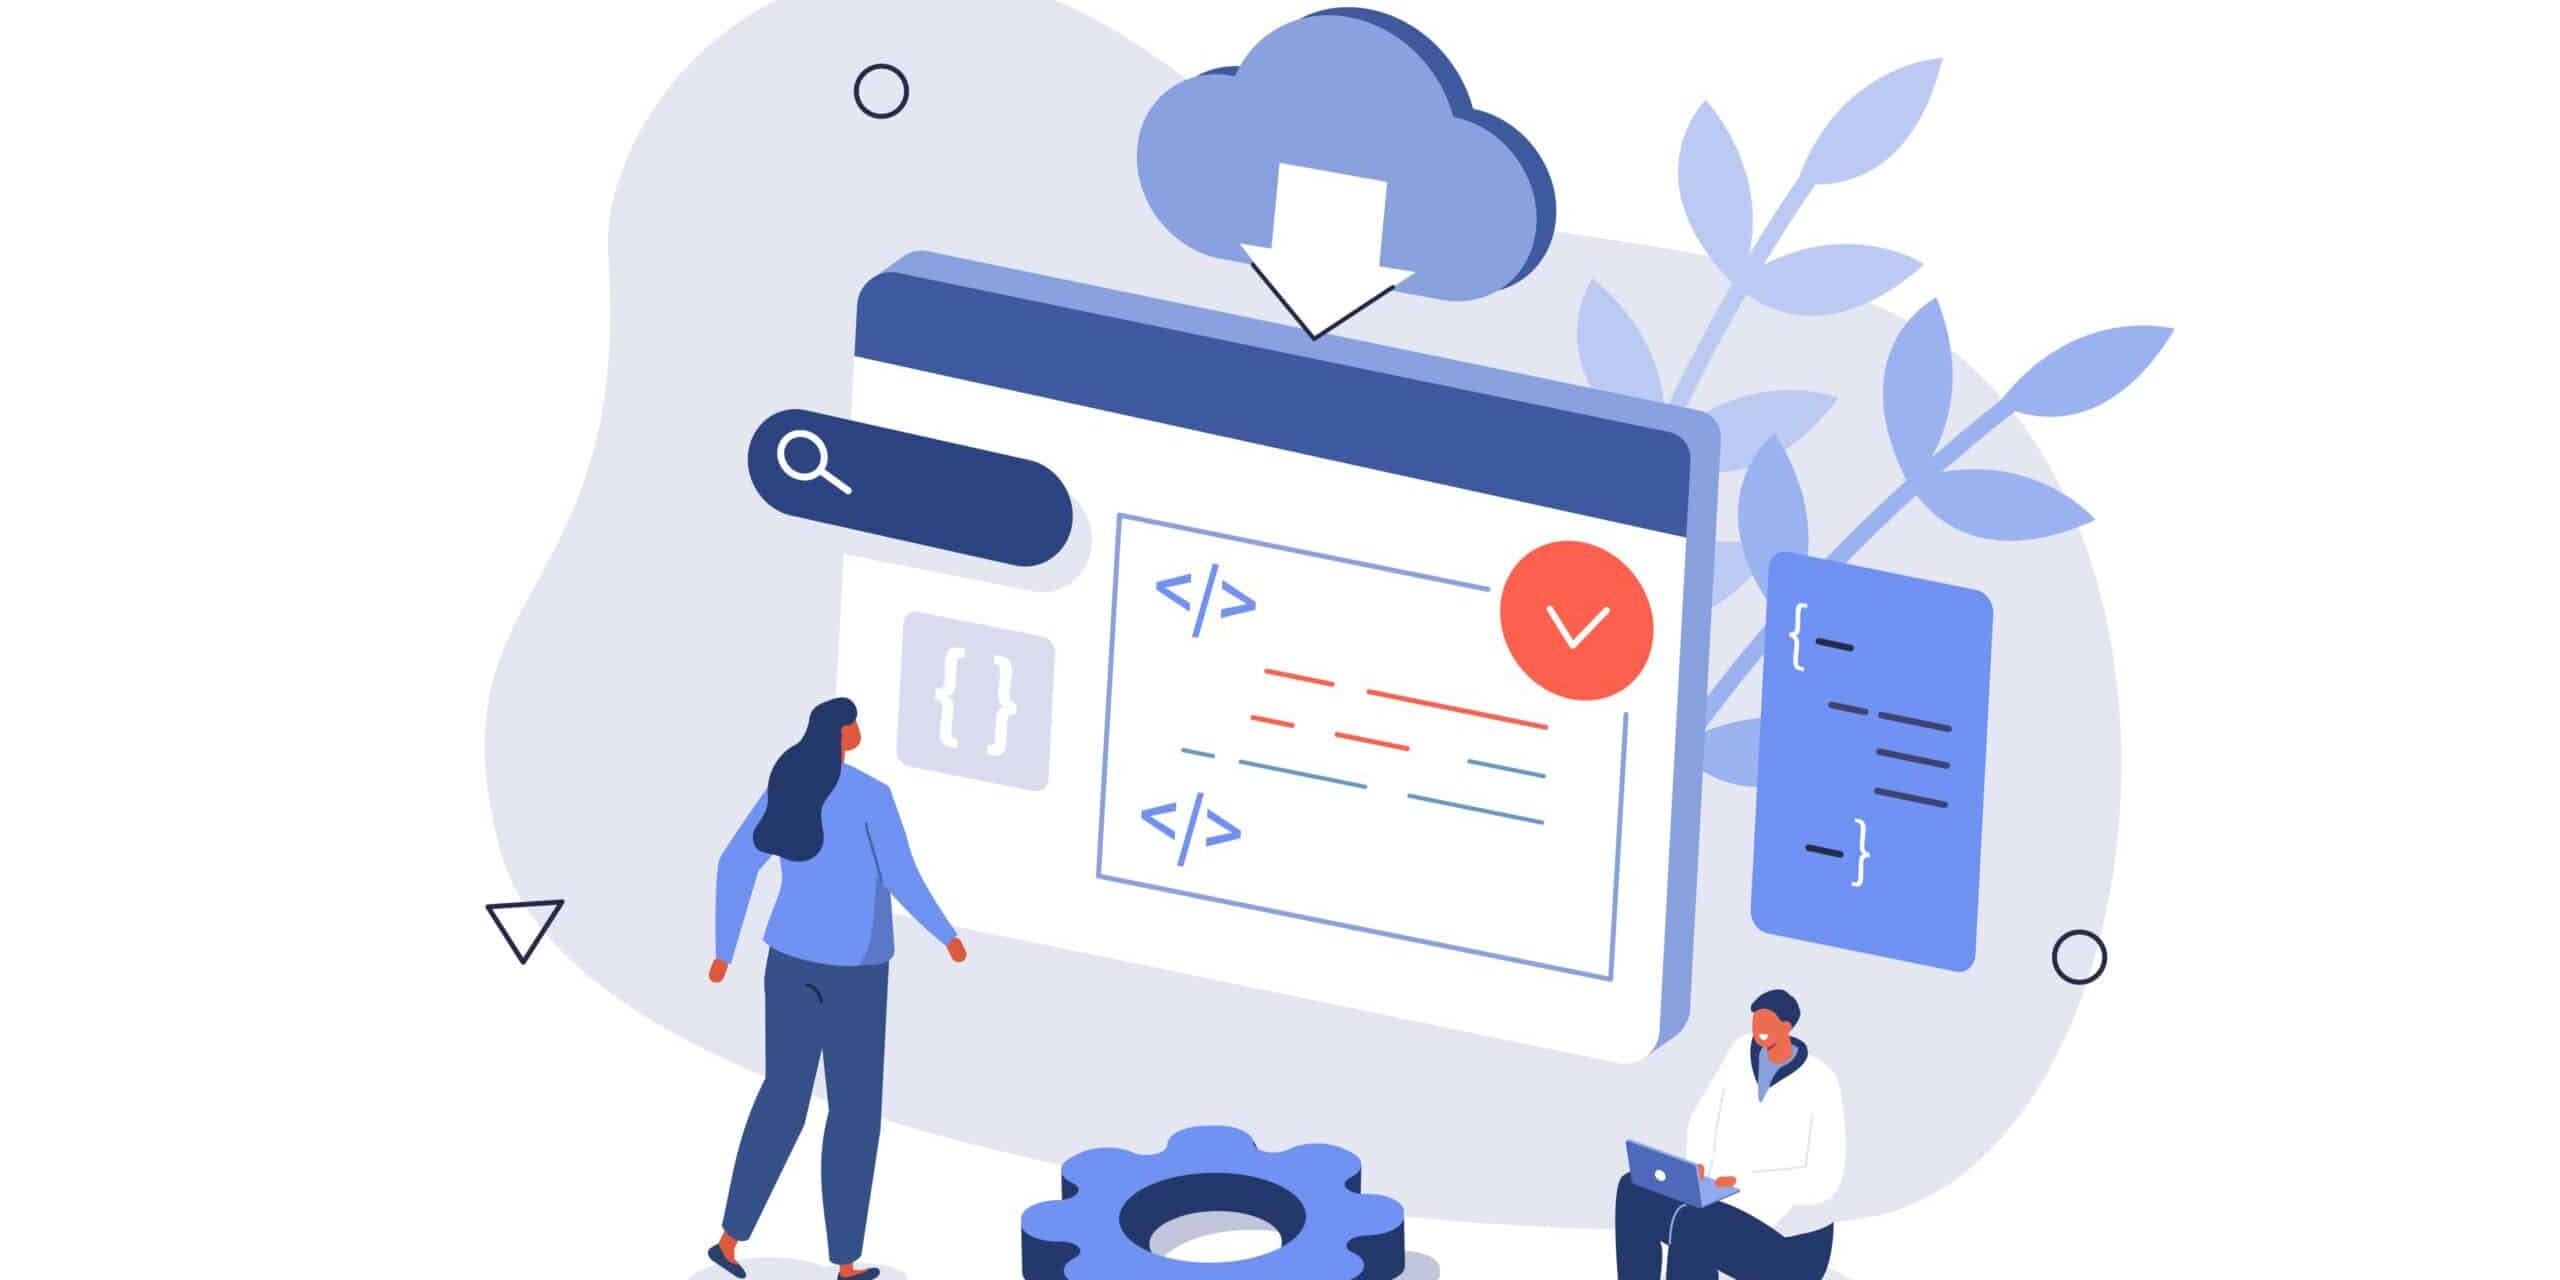 People characters developing software and sending data to cloud storage. Developers team programming and writing program code. Development process concept. Flat isometric vector illustration isolated.